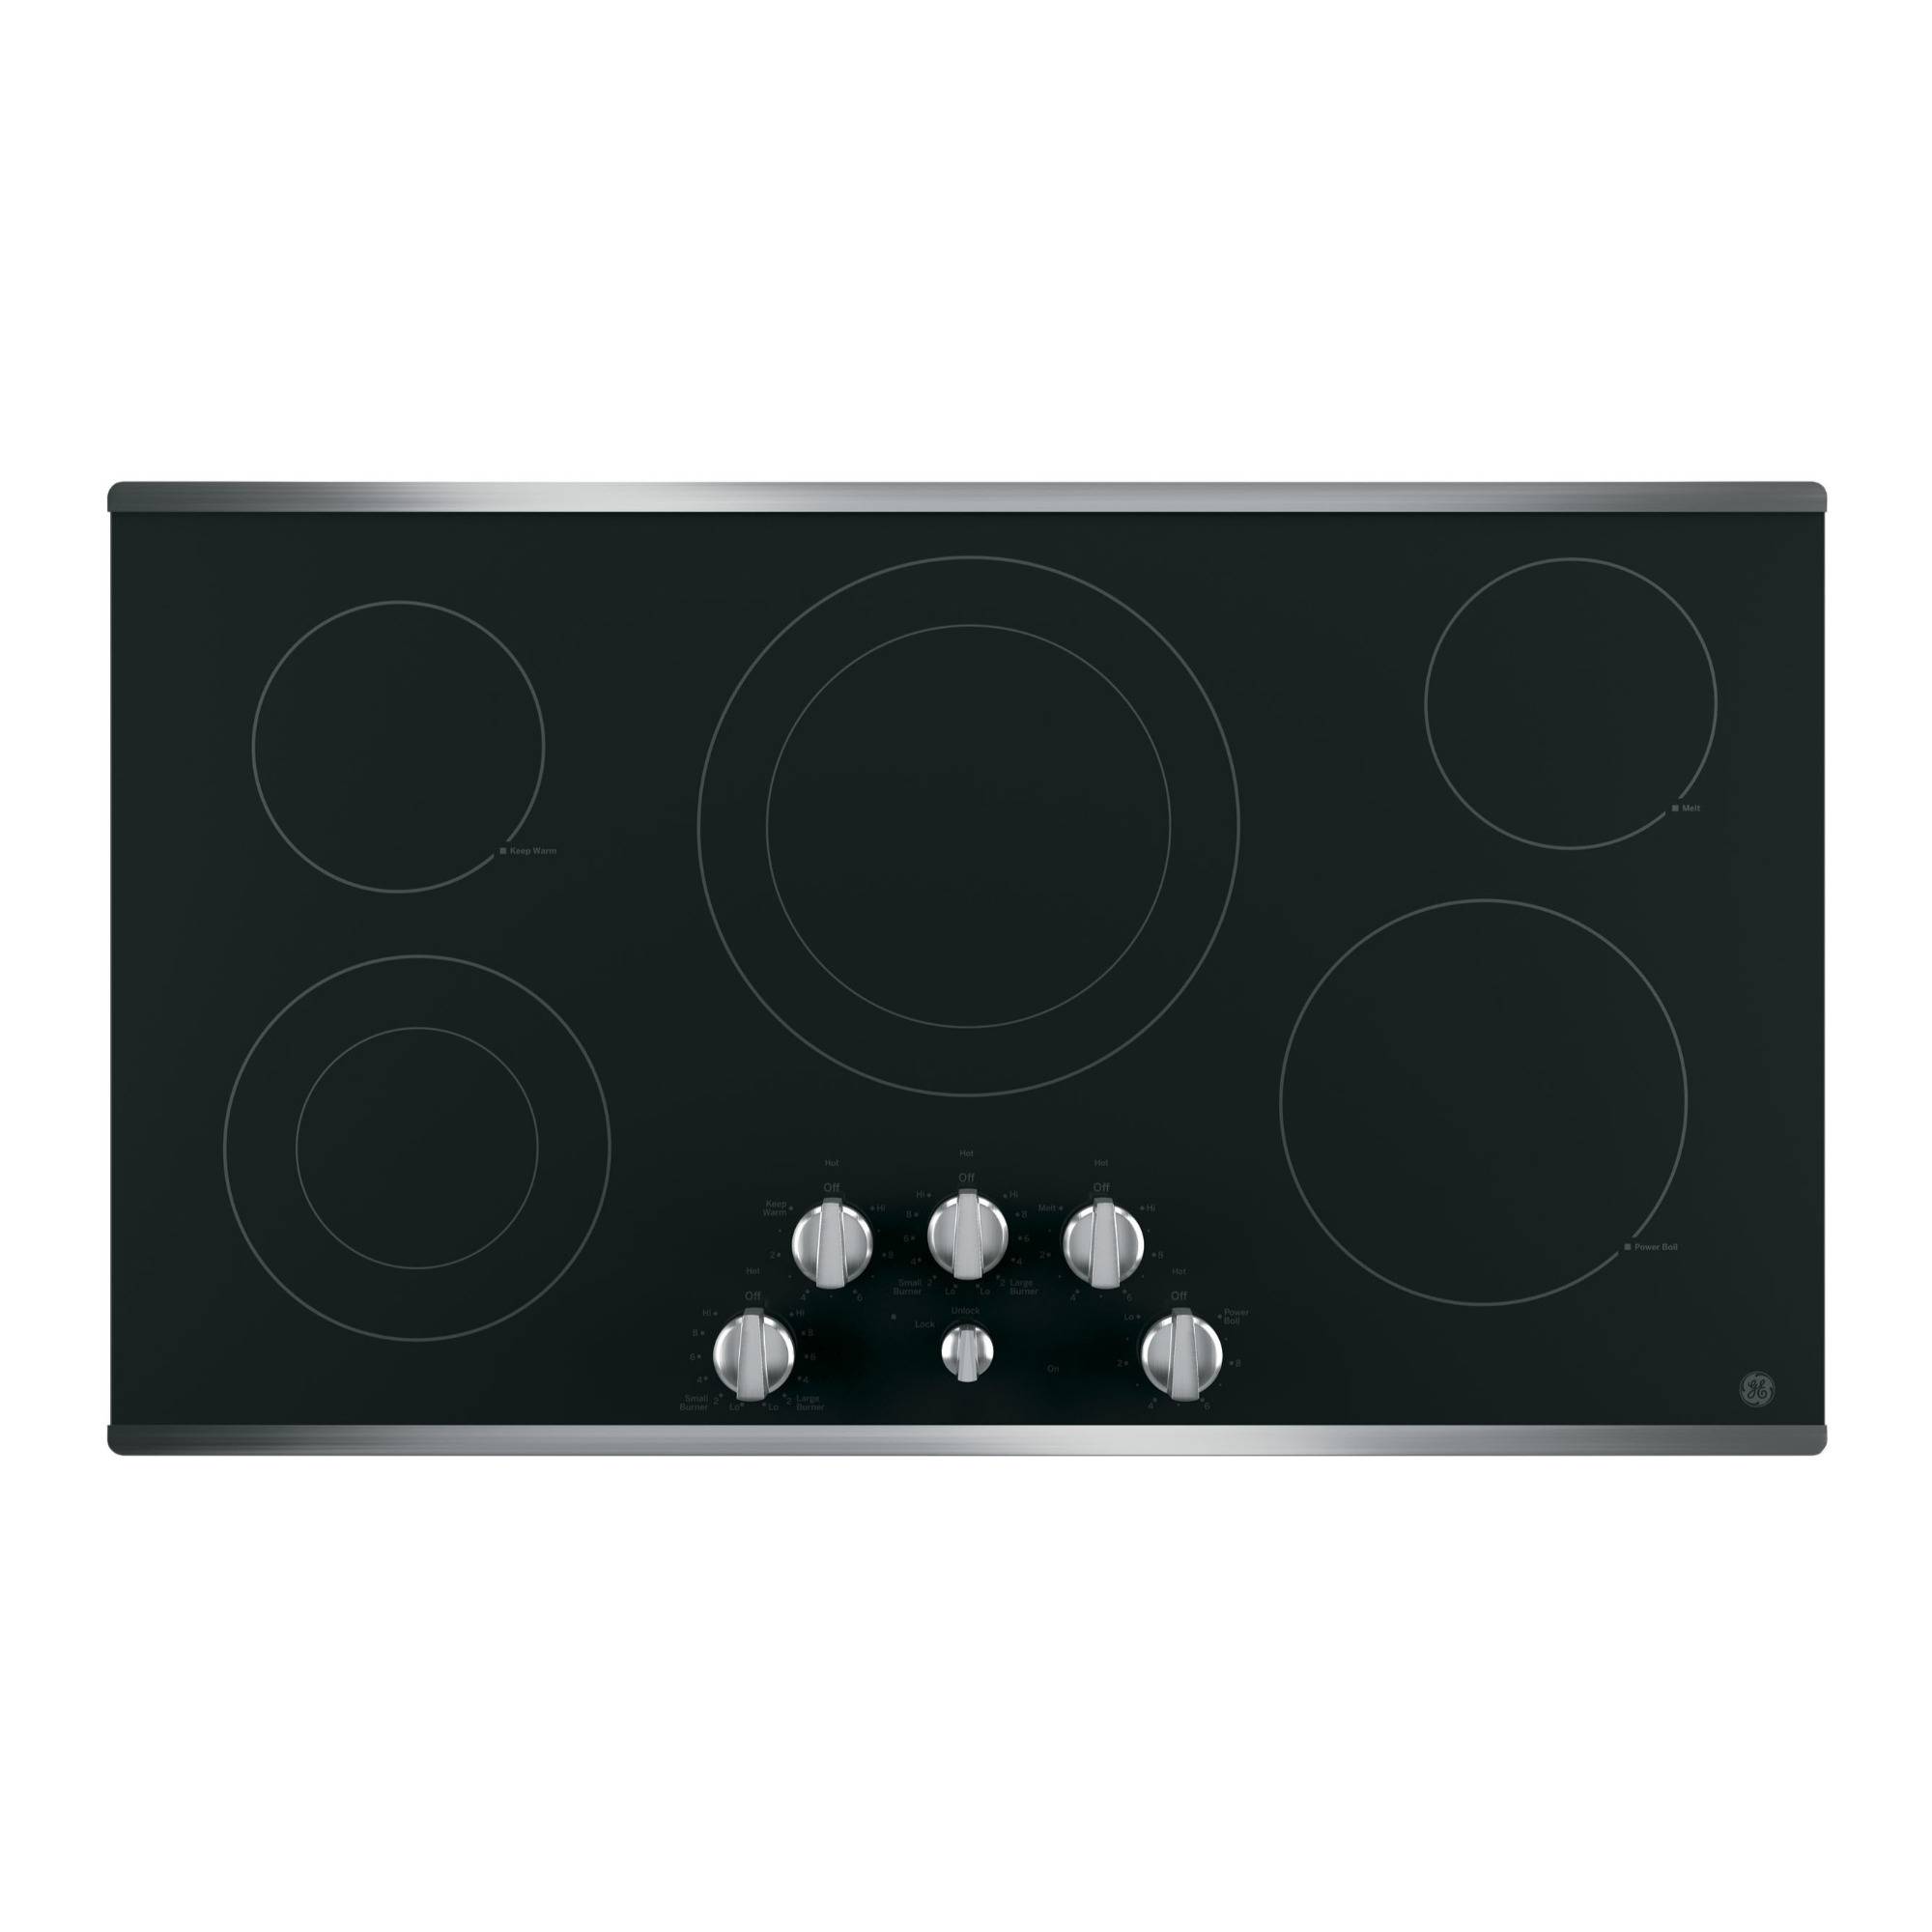 GE® 36" Built-In Knob Control Electric Cooktop (Stainless Steel)